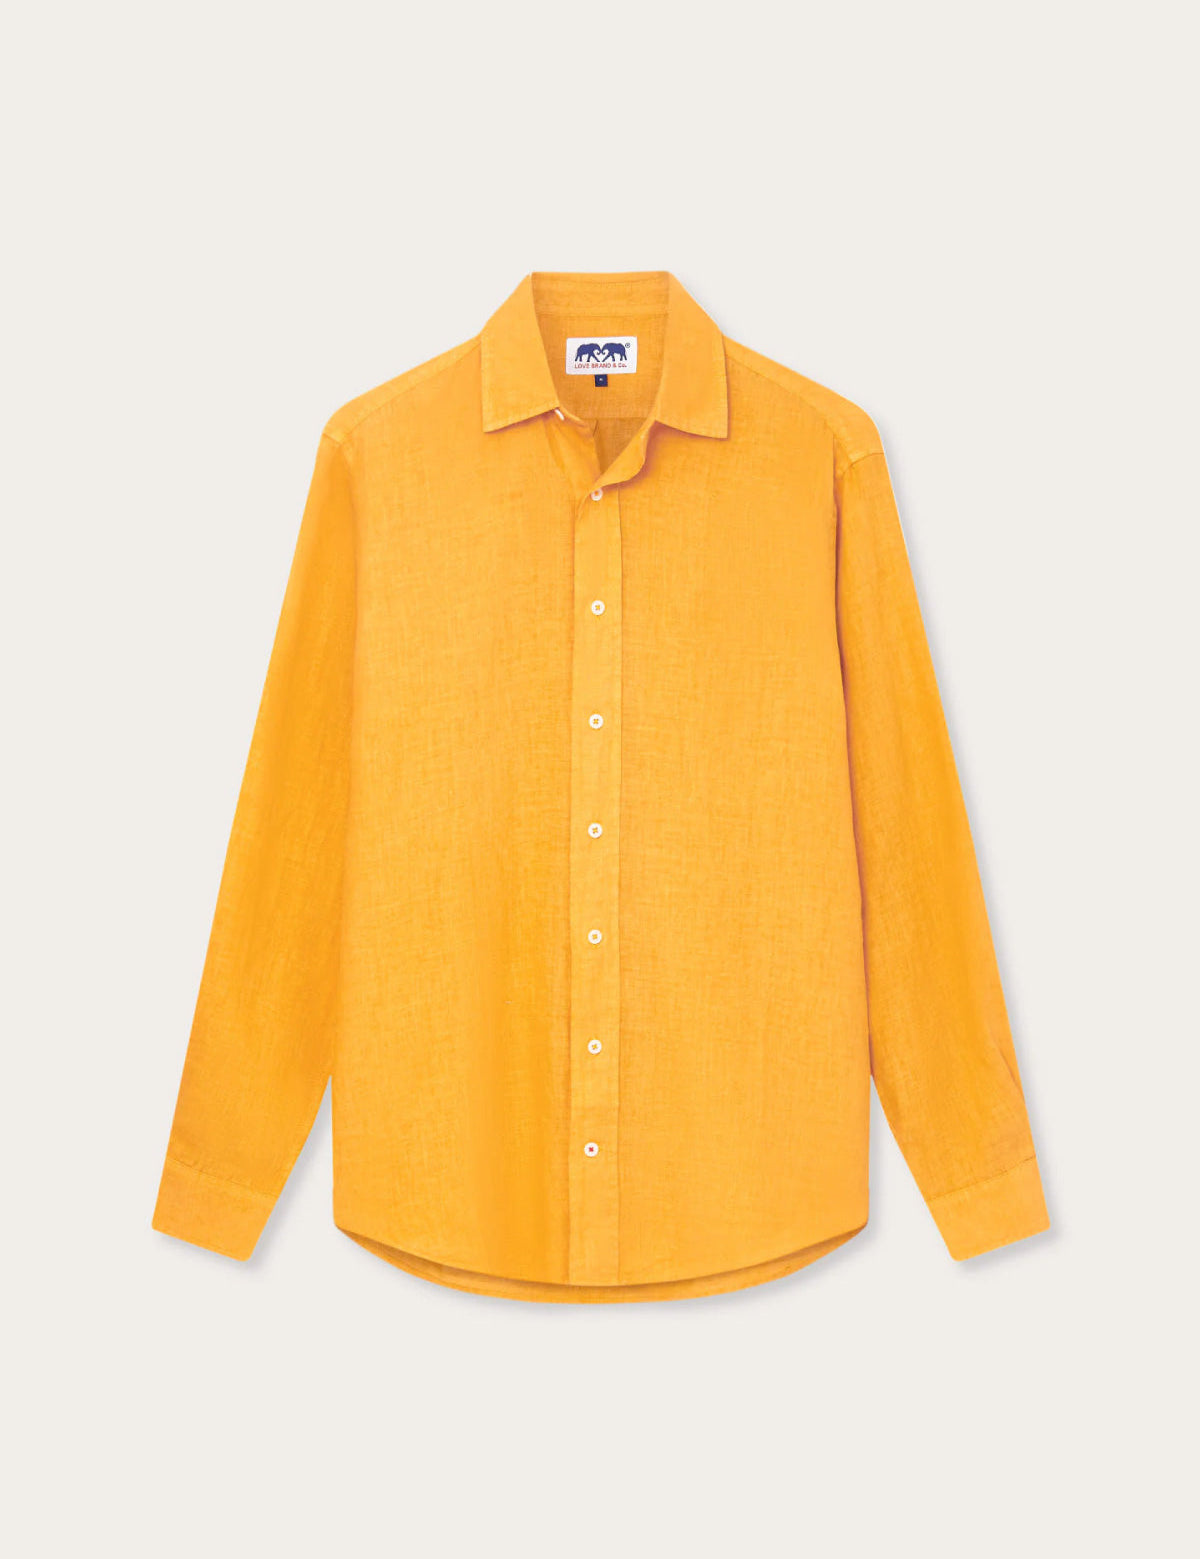 Men's Golden Hour Abaco Linen Shirt in vibrant golden hue, long-sleeved with a classic collar and button-down front, made from breathable linen fabric for comfort and style.